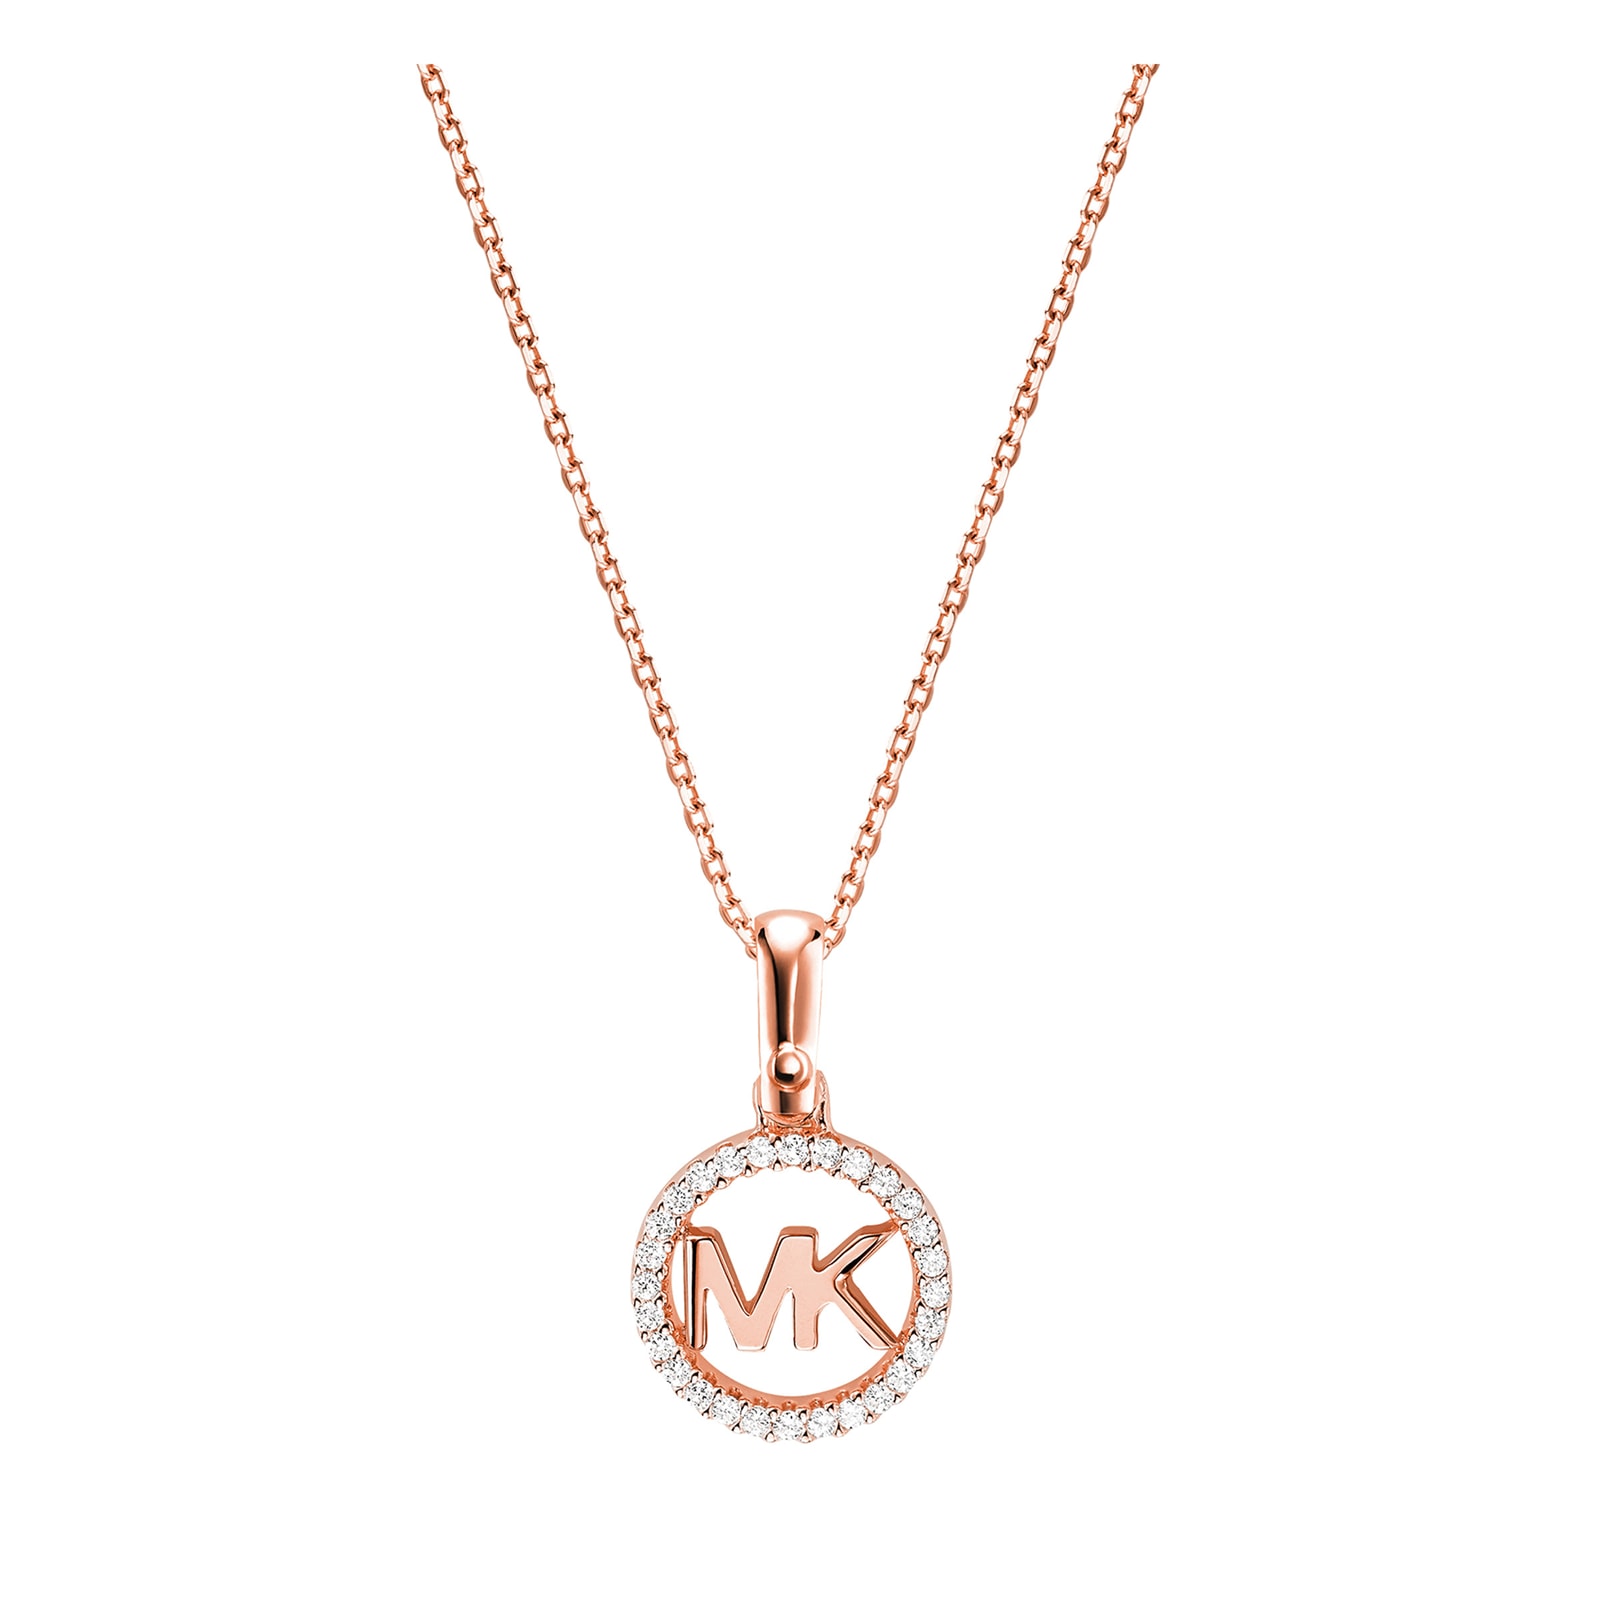 Custom Kors 14ct Rose Gold Plated Charm Necklace